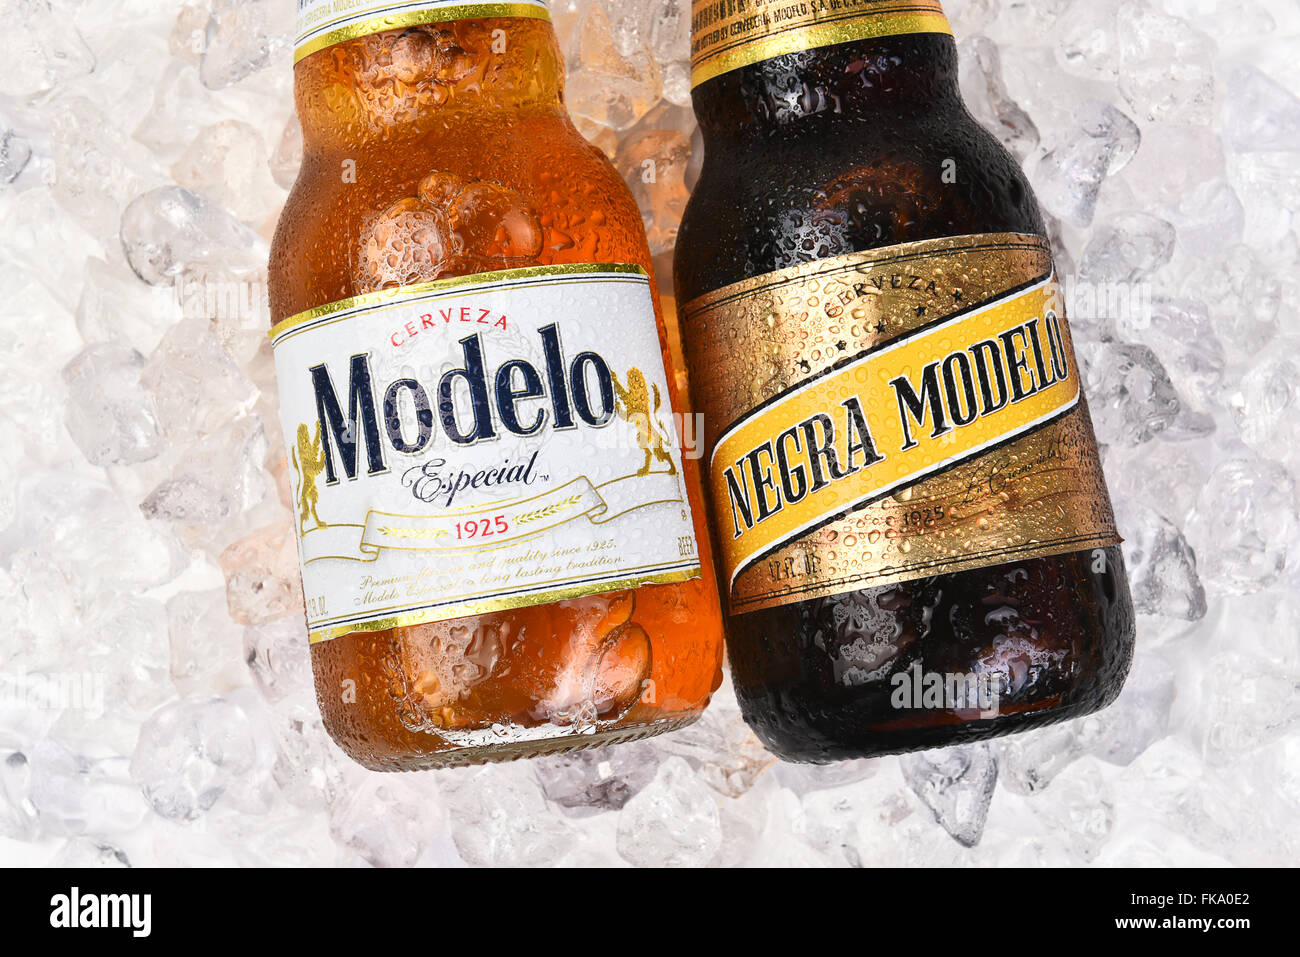 Two Modelo beer bottles on a bed of ice. Negra Modelo and Modelo Especial in horizontal format. Stock Photo